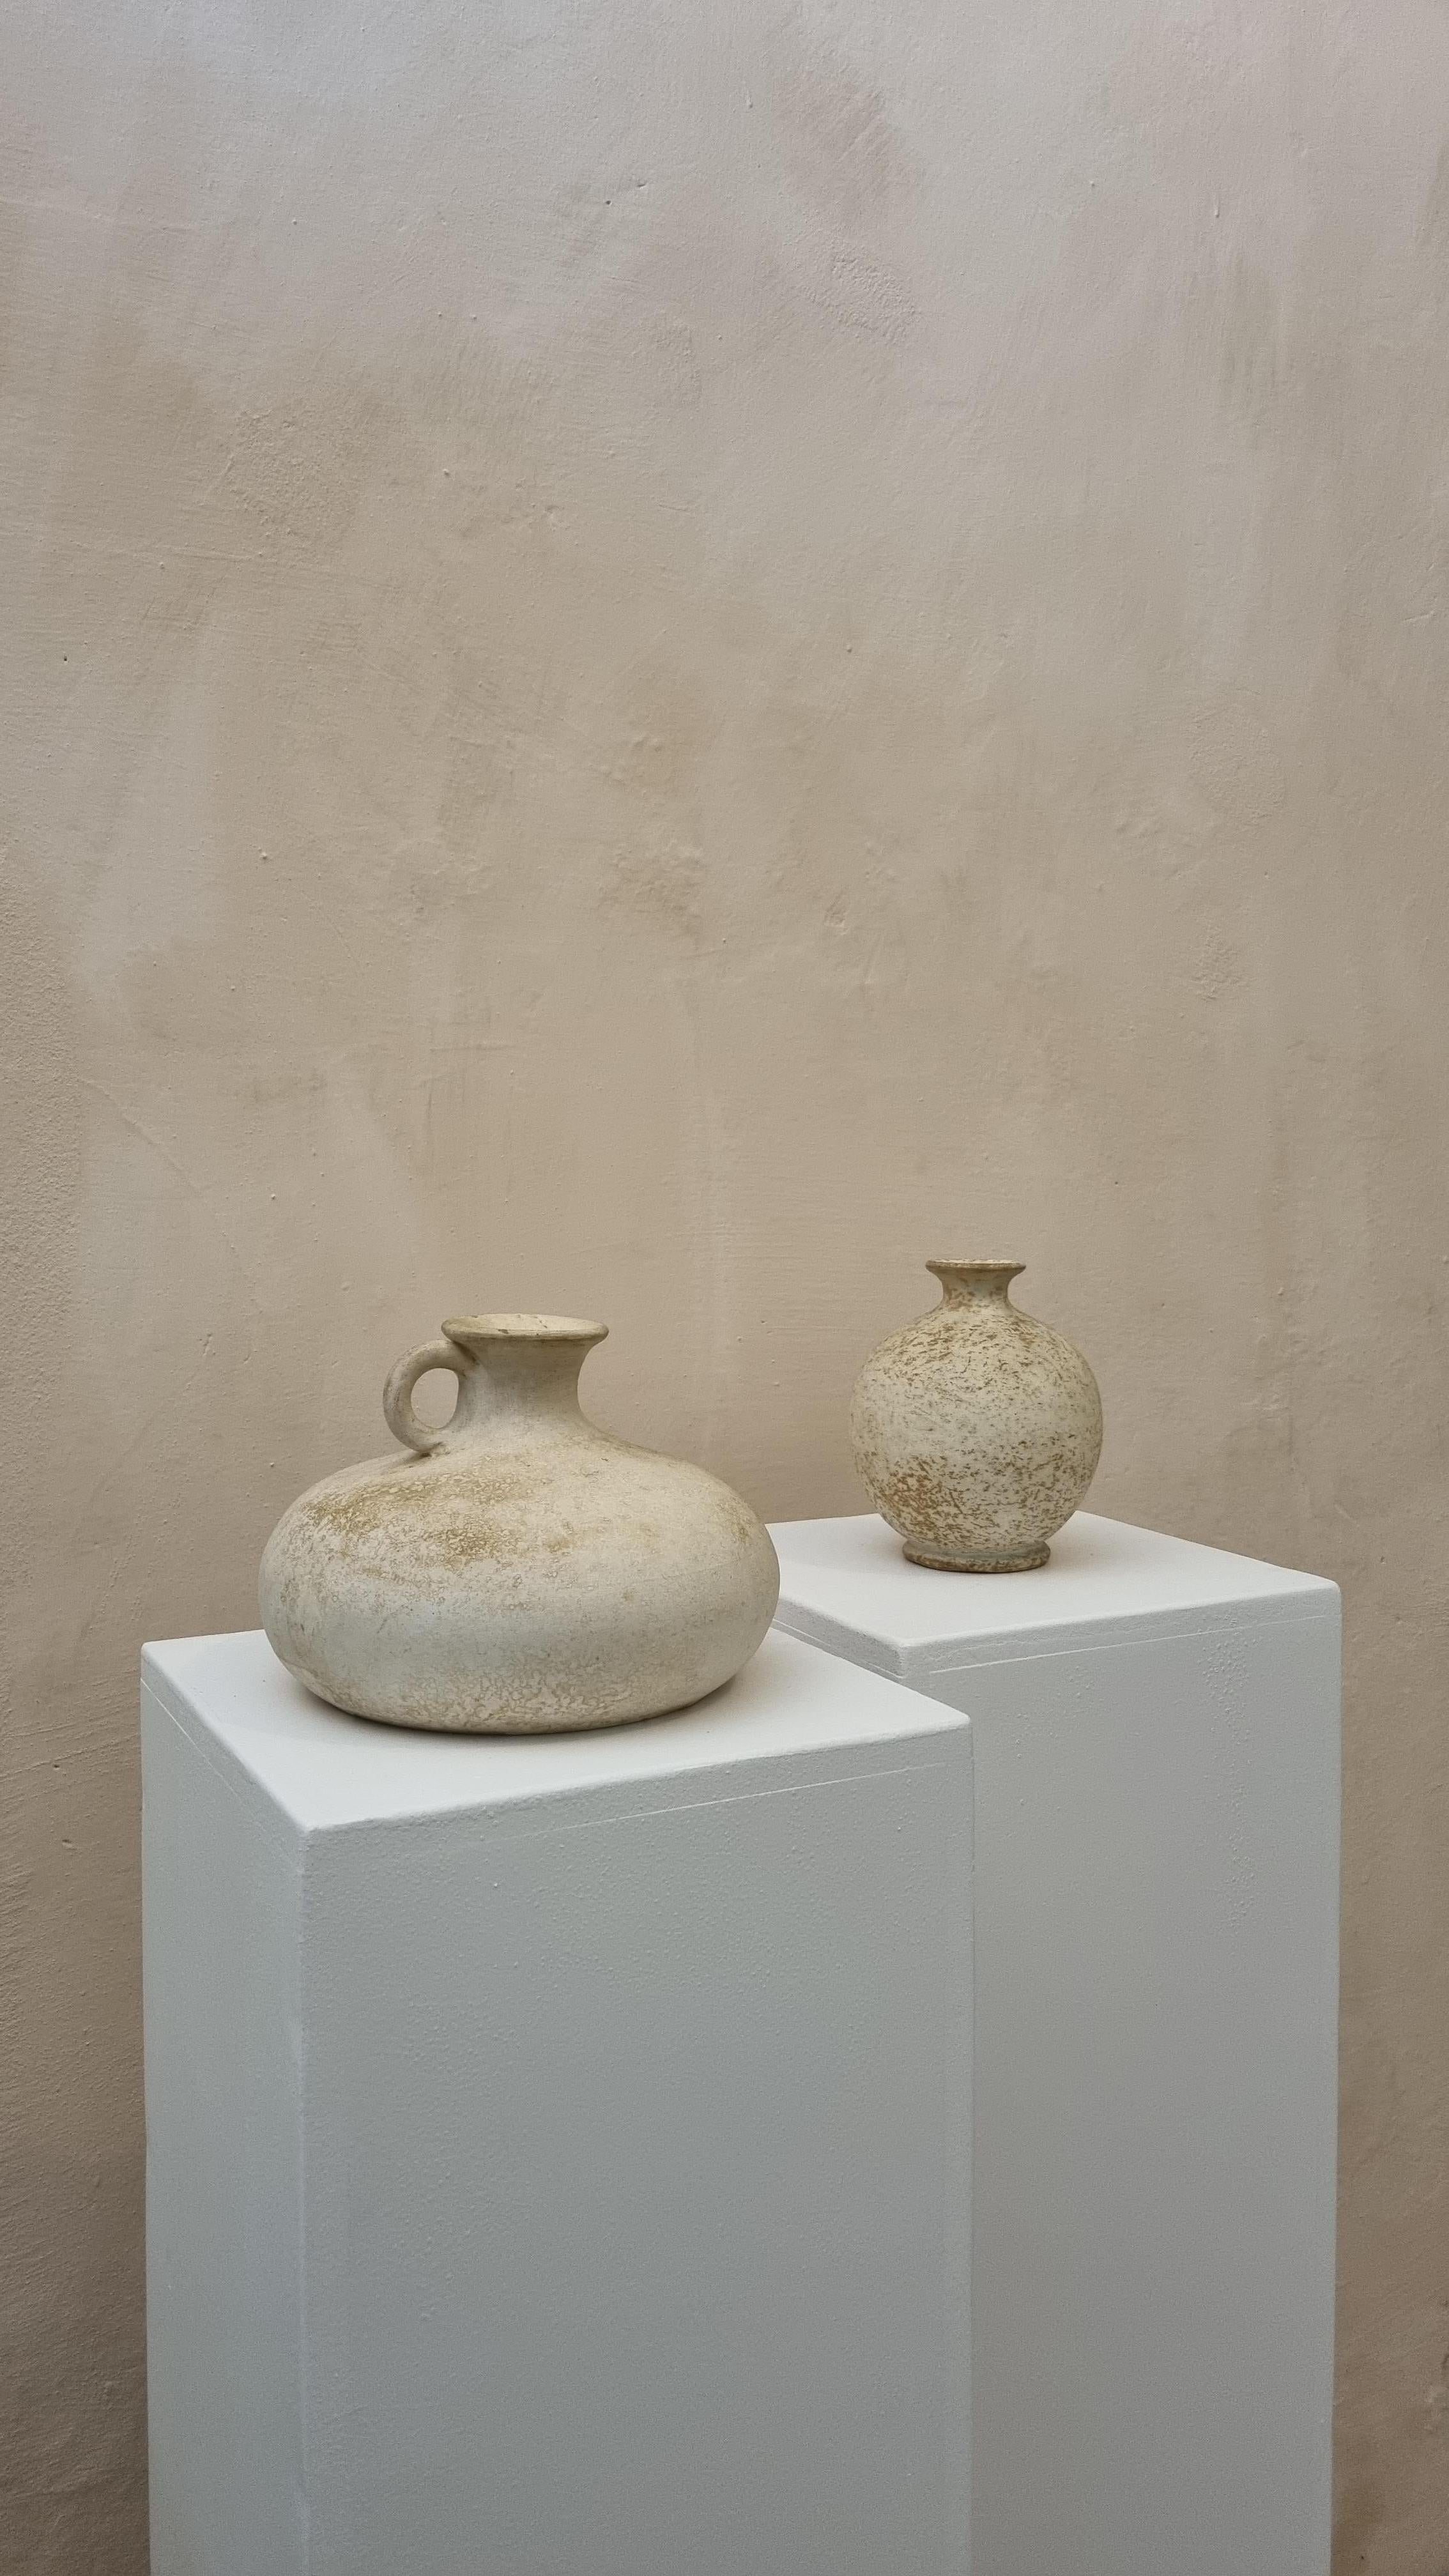 Pair of earthenware amphorae produced by Vetus Siena, 70's.
White coarse clay
Each work created by Vetus Siena follows a very complex working process, both in the formal and decorative part.
The realization of a ceramic work can be obtained with